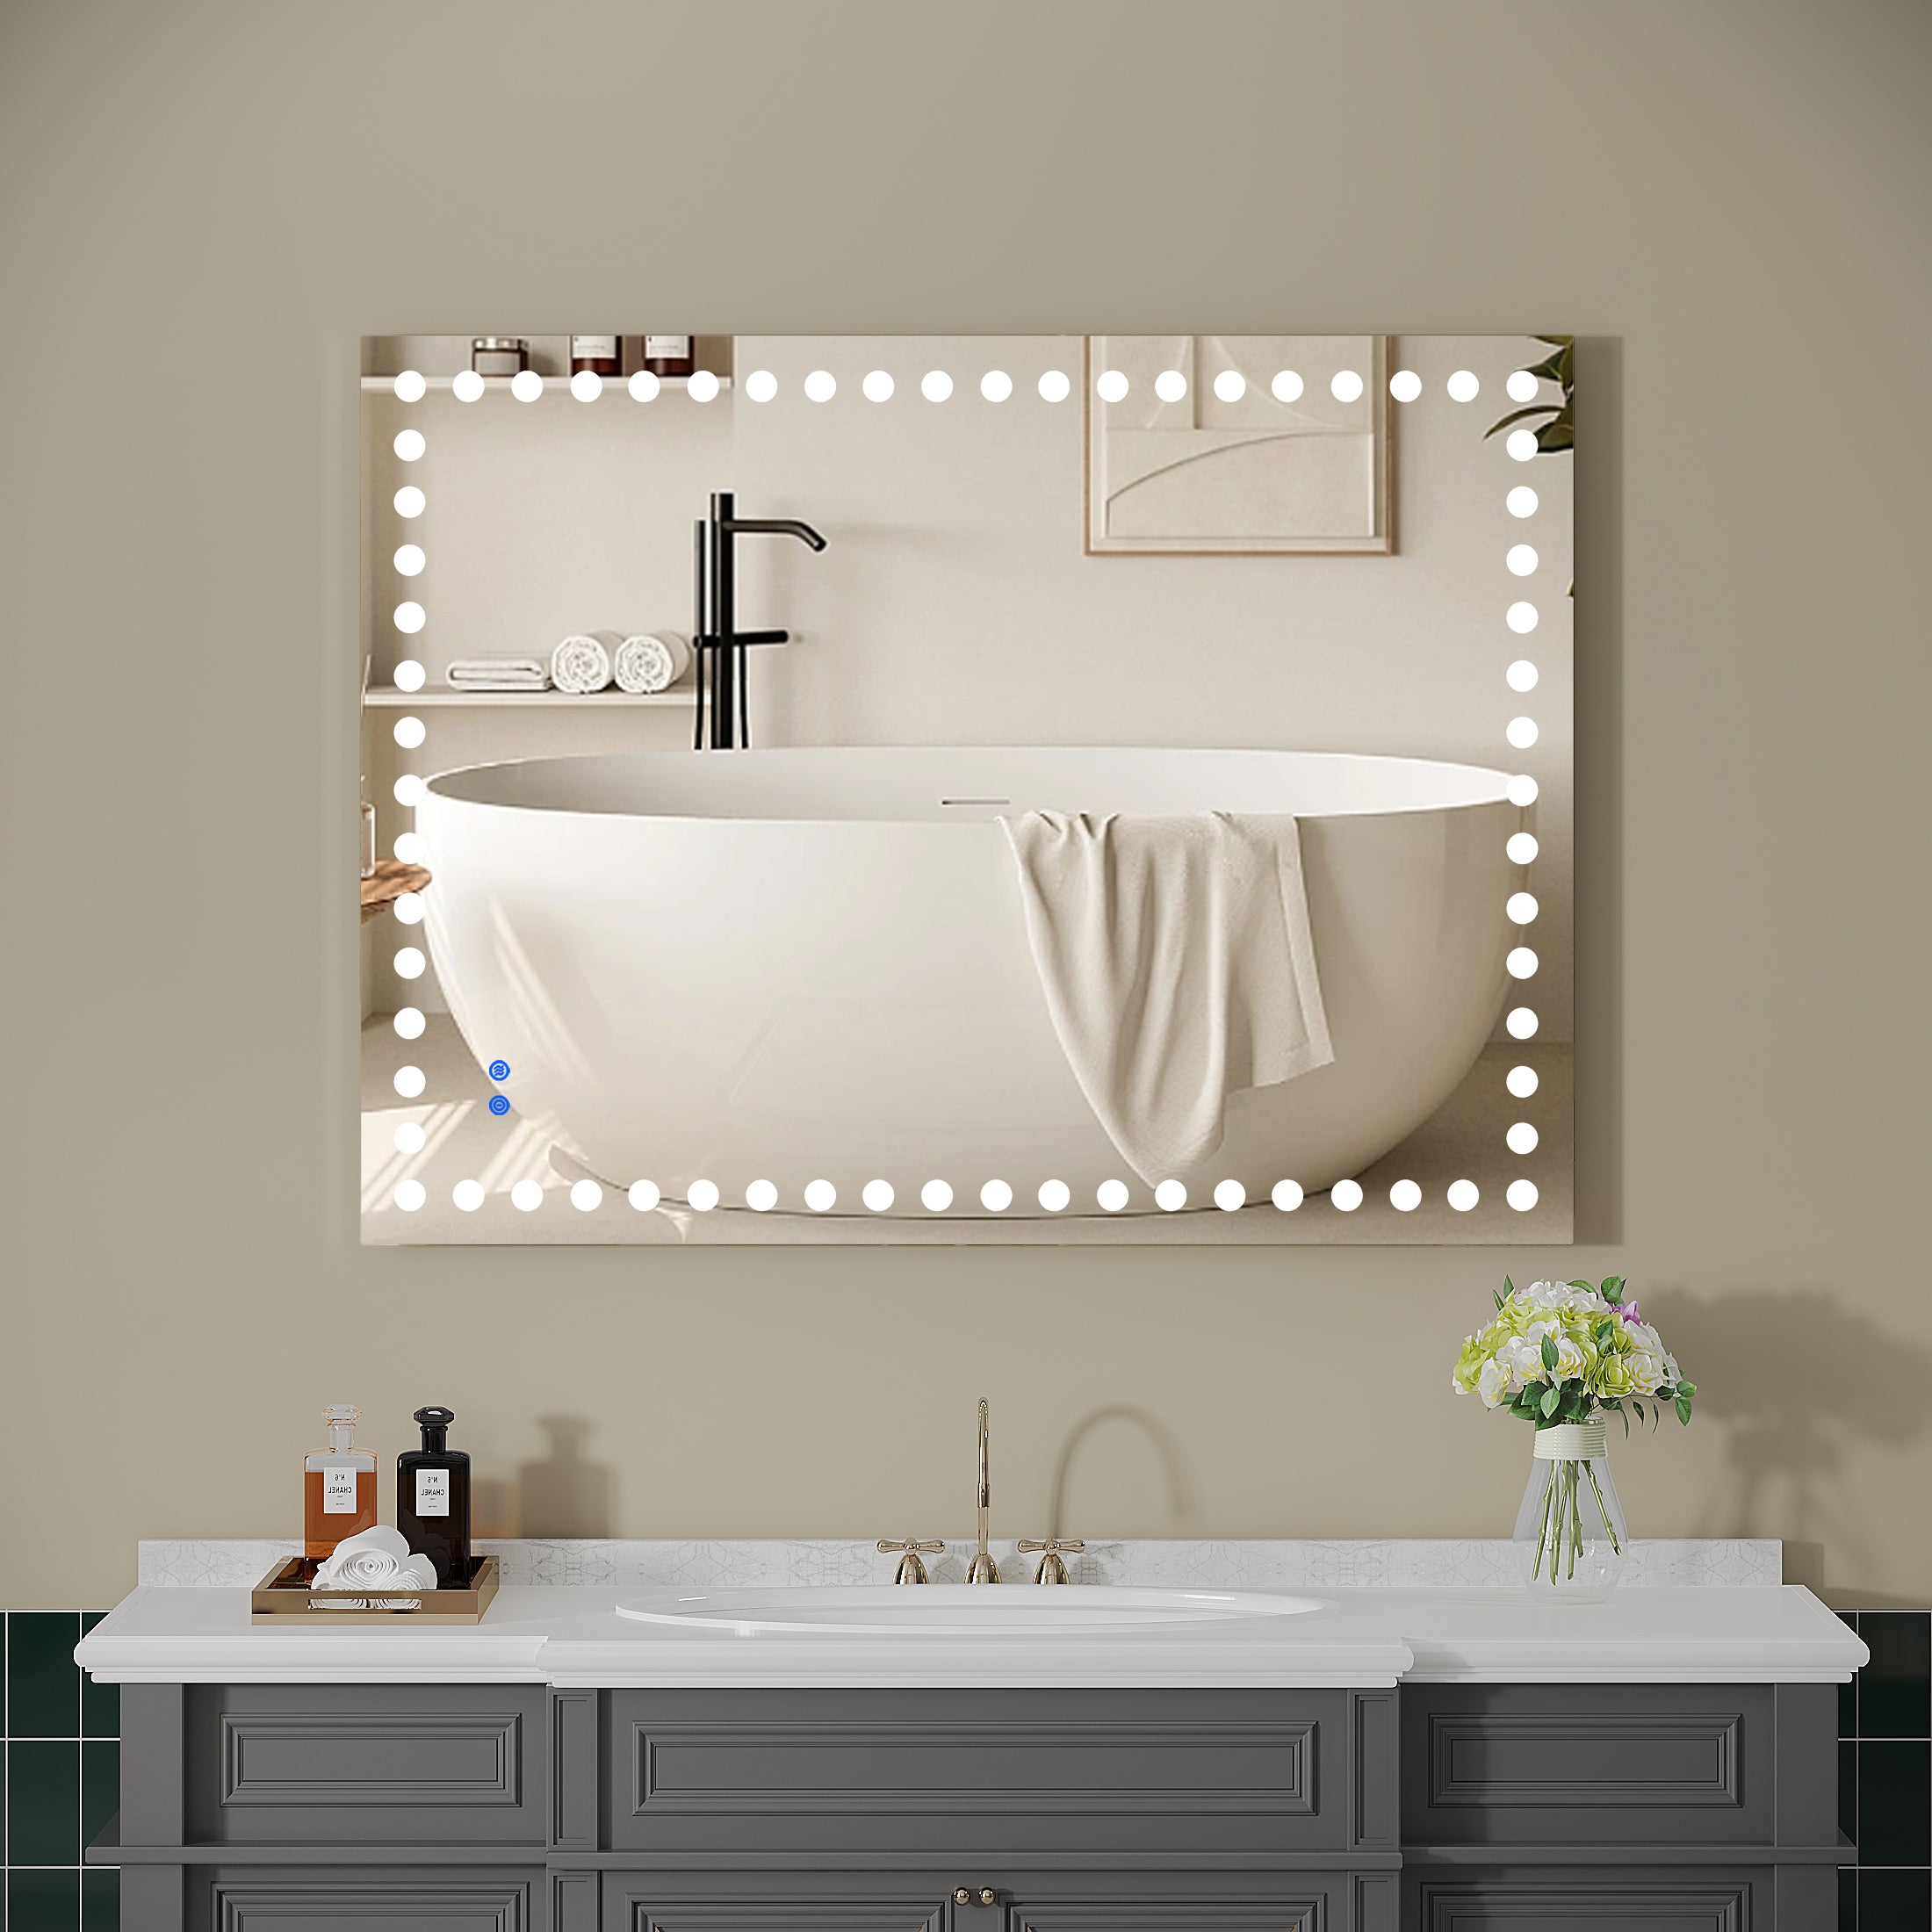 48"X36" Rectangle LED Bathroom Vanity Mirror with Touch Sensor Dimmer, Anti-Fog Memory